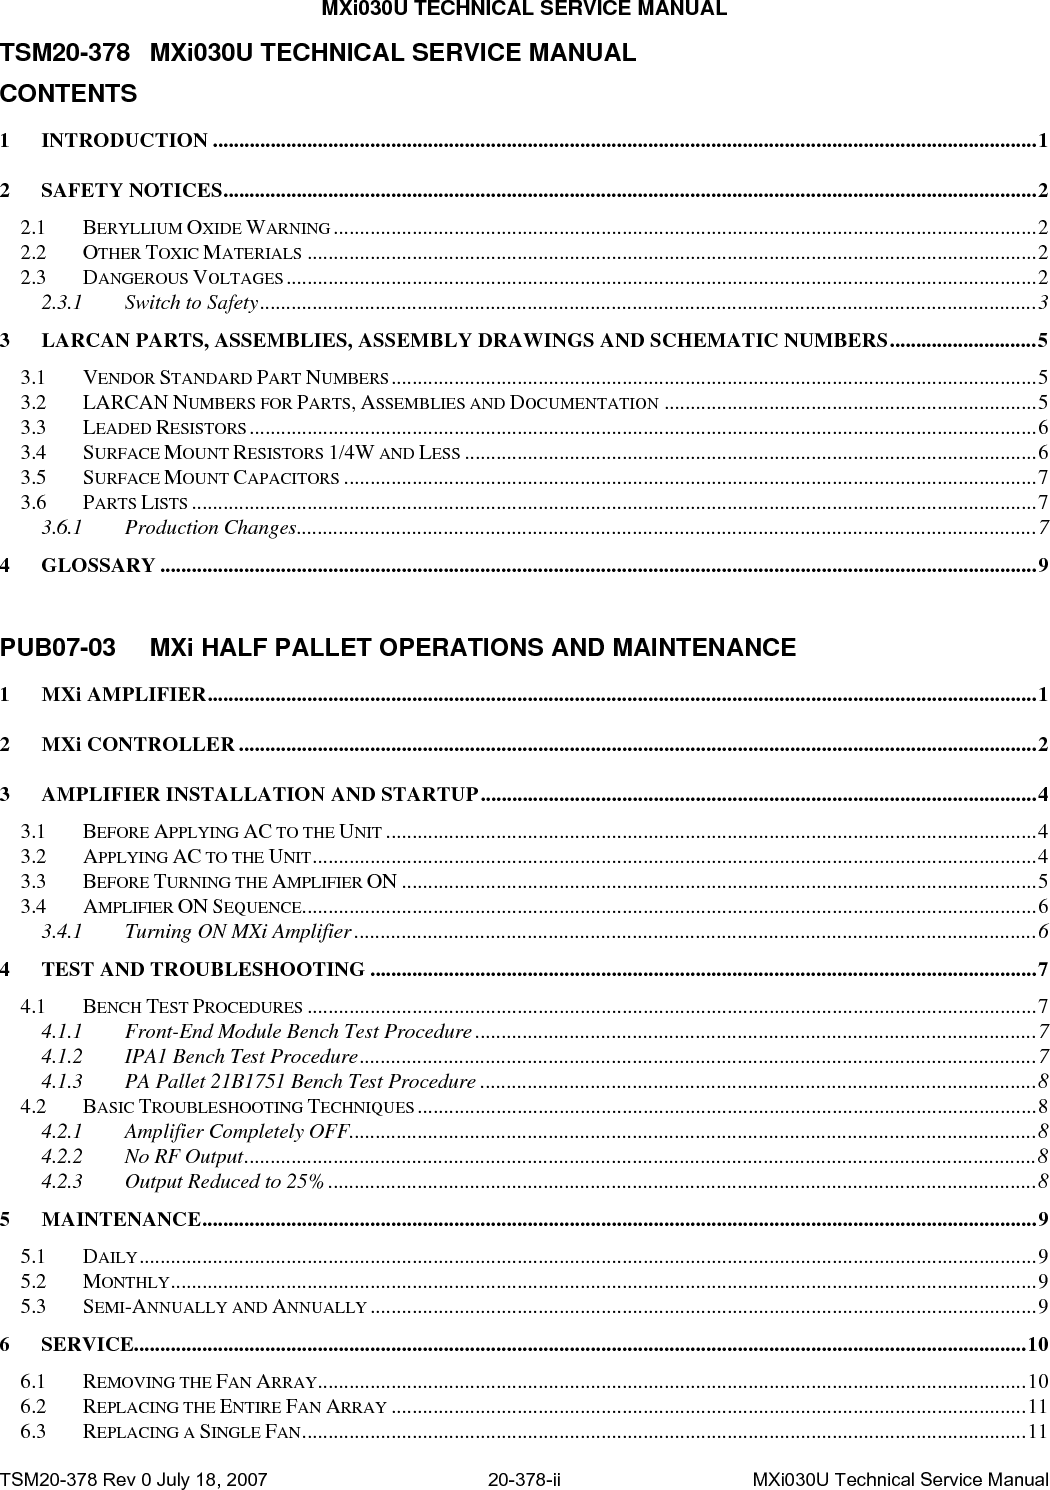 MXi030U TECHNICAL SERVICE MANUAL TSM20-378 MXi030U TECHNICAL SERVICE MANUAL CONTENTS 1 INTRODUCTION .............................................................................................................................................................1 2 SAFETY NOTICES...........................................................................................................................................................2 2.1 BERYLLIUM OXIDE WARNING ......................................................................................................................................2 2.2 OTHER TOXIC MATERIALS ...........................................................................................................................................2 2.3 DANGEROUS VOLTAGES...............................................................................................................................................2 2.3.1 Switch to Safety....................................................................................................................................................3 3 LARCAN PARTS, ASSEMBLIES, ASSEMBLY DRAWINGS AND SCHEMATIC NUMBERS............................5 3.1 VENDOR STANDARD PART NUMBERS...........................................................................................................................5 3.2 LARCAN NUMBERS FOR PARTS, ASSEMBLIES AND DOCUMENTATION .......................................................................5 3.3 LEADED RESISTORS......................................................................................................................................................6 3.4 SURFACE MOUNT RESISTORS 1/4W AND LESS .............................................................................................................6 3.5 SURFACE MOUNT CAPACITORS ....................................................................................................................................7 3.6 PARTS LISTS .................................................................................................................................................................7 3.6.1 Production Changes.............................................................................................................................................7 4 GLOSSARY .......................................................................................................................................................................9  PUB07-03  MXi HALF PALLET OPERATIONS AND MAINTENANCE 1 MXi AMPLIFIER..............................................................................................................................................................1 2 MXi CONTROLLER ........................................................................................................................................................2 3 AMPLIFIER INSTALLATION AND STARTUP..........................................................................................................4 3.1 BEFORE APPLYING AC TO THE UNIT ............................................................................................................................4 3.2 APPLYING AC TO THE UNIT..........................................................................................................................................4 3.3 BEFORE TURNING THE AMPLIFIER ON .........................................................................................................................5 3.4 AMPLIFIER ON SEQUENCE............................................................................................................................................6 3.4.1 Turning ON MXi Amplifier ..................................................................................................................................6 4 TEST AND TROUBLESHOOTING ...............................................................................................................................7 4.1 BENCH TEST PROCEDURES ...........................................................................................................................................7 4.1.1 Front-End Module Bench Test Procedure...........................................................................................................7 4.1.2 IPA1 Bench Test Procedure.................................................................................................................................7 4.1.3 PA Pallet 21B1751 Bench Test Procedure ..........................................................................................................8 4.2 BASIC TROUBLESHOOTING TECHNIQUES ......................................................................................................................8 4.2.1 Amplifier Completely OFF...................................................................................................................................8 4.2.2 No RF Output.......................................................................................................................................................8 4.2.3 Output Reduced to 25%.......................................................................................................................................8 5 MAINTENANCE...............................................................................................................................................................9 5.1 DAILY...........................................................................................................................................................................9 5.2 MONTHLY.....................................................................................................................................................................9 5.3 SEMI-ANNUALLY AND ANNUALLY ...............................................................................................................................9 6 SERVICE..........................................................................................................................................................................10 6.1 REMOVING THE FAN ARRAY.......................................................................................................................................10 6.2 REPLACING THE ENTIRE FAN ARRAY .........................................................................................................................11 6.3 REPLACING A SINGLE FAN..........................................................................................................................................11 TSM20-378 Rev 0 July 18, 2007  20-378-ii  MXi030U Technical Service Manual 